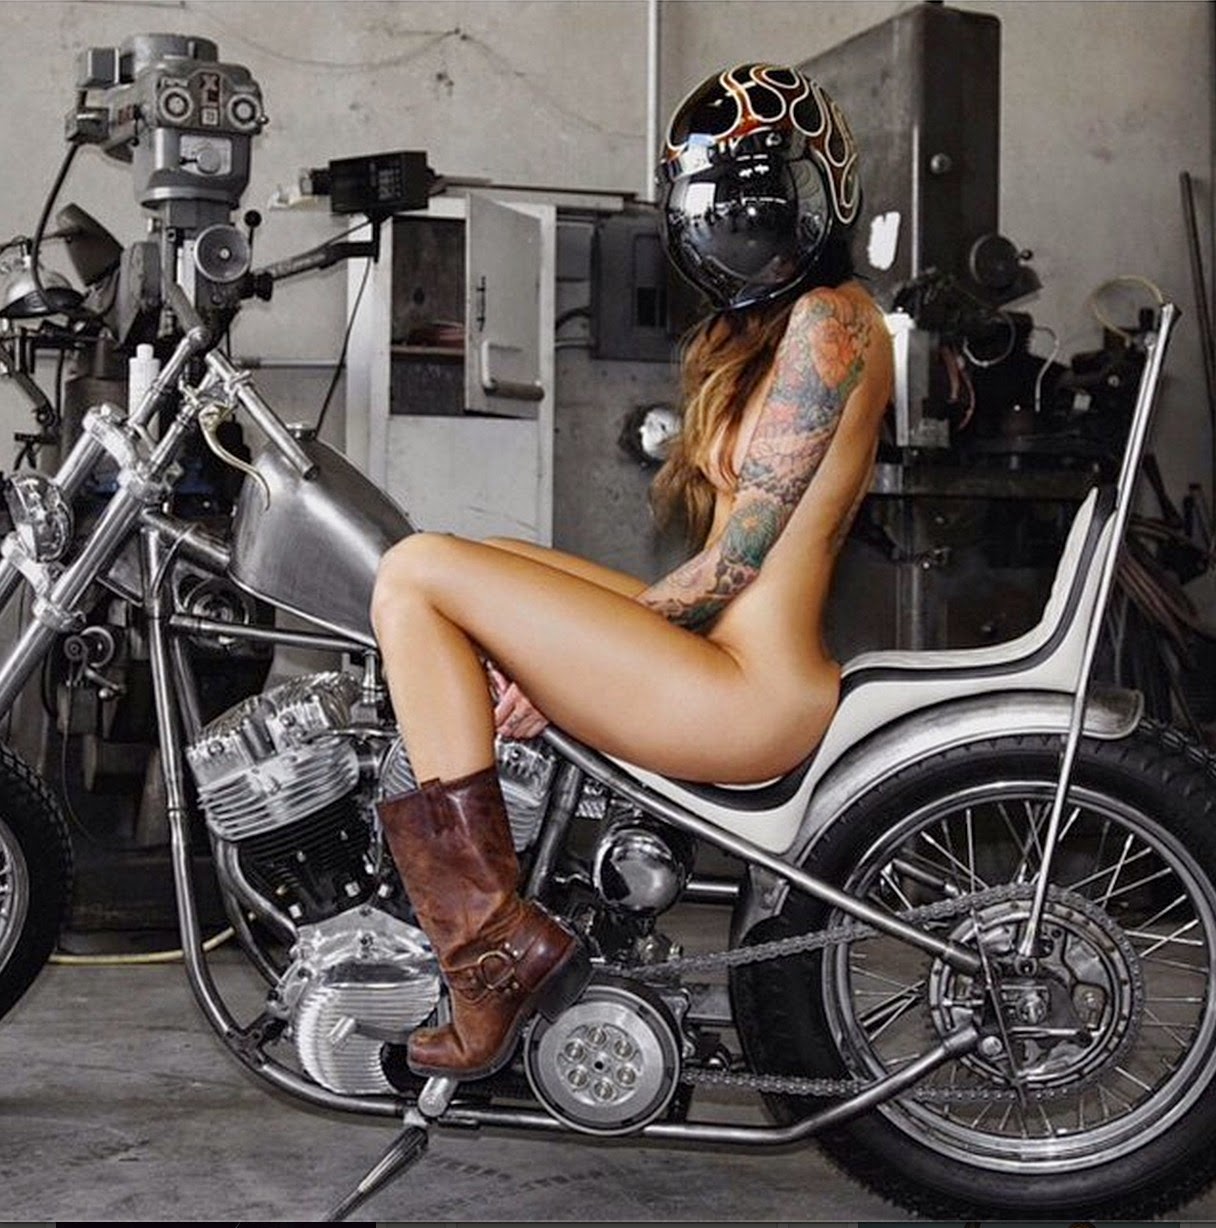 naked girls on motorcycles goldwing